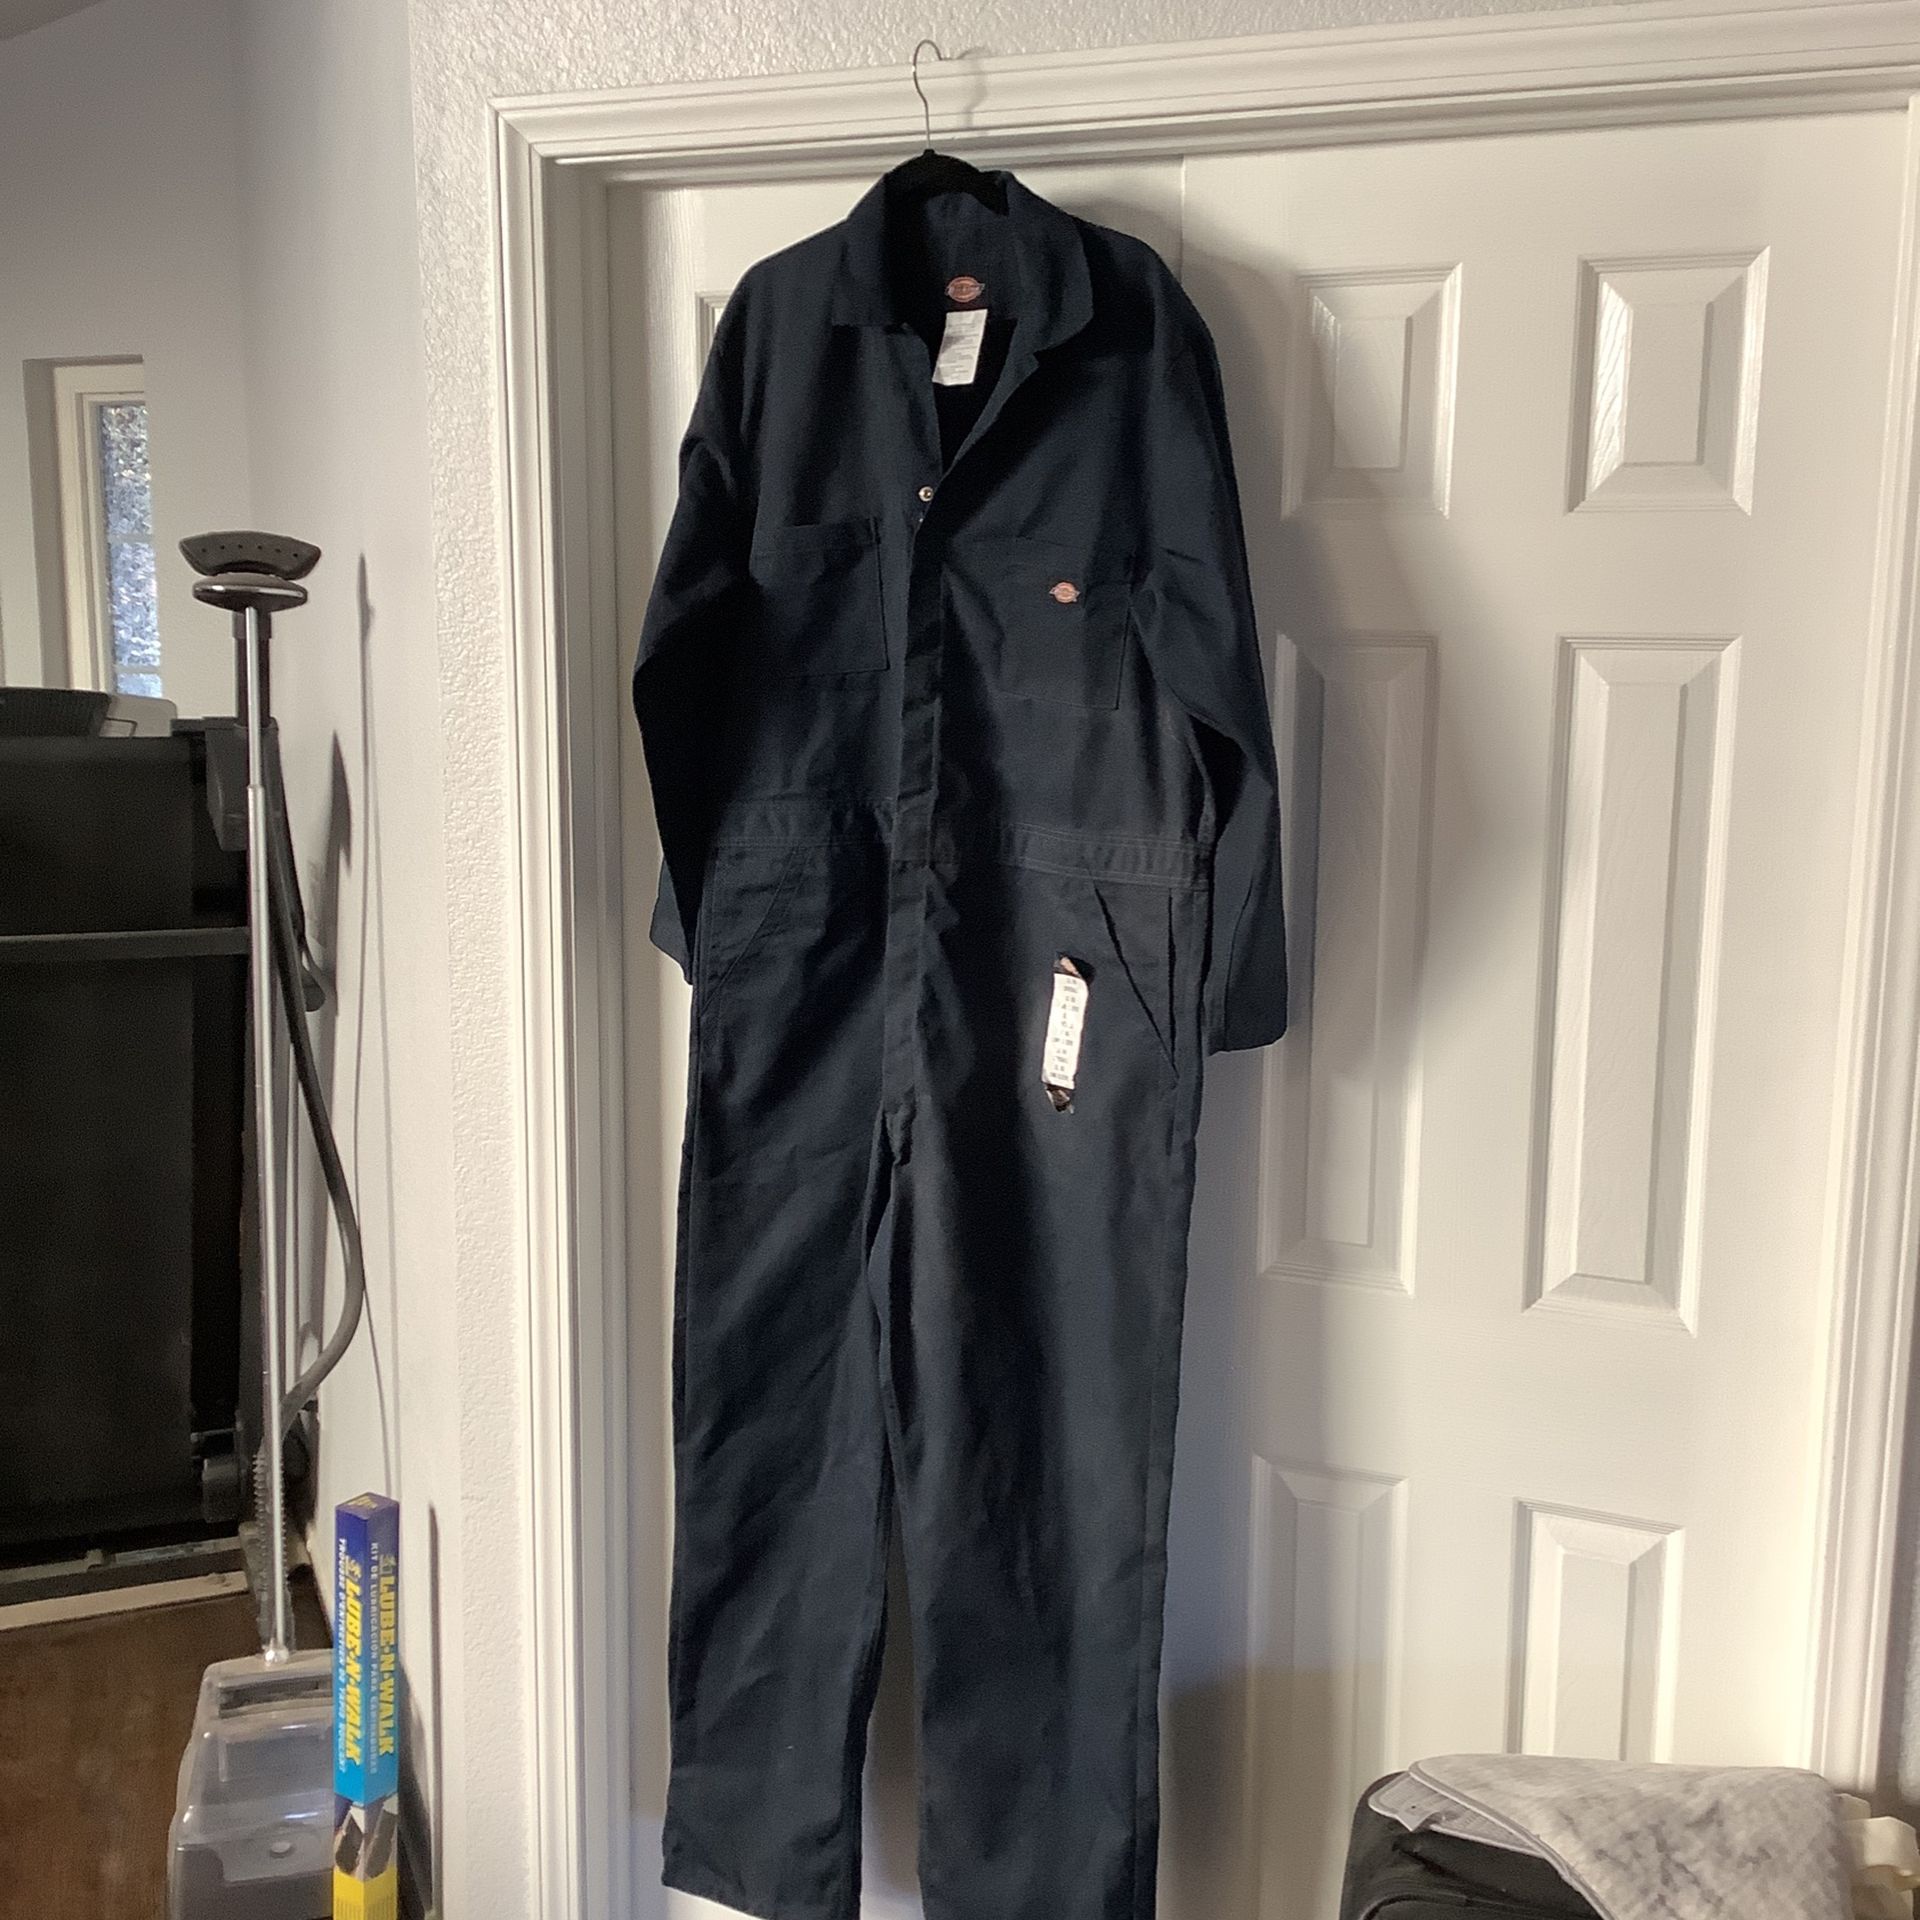 Dickies overall long sleeves extra large